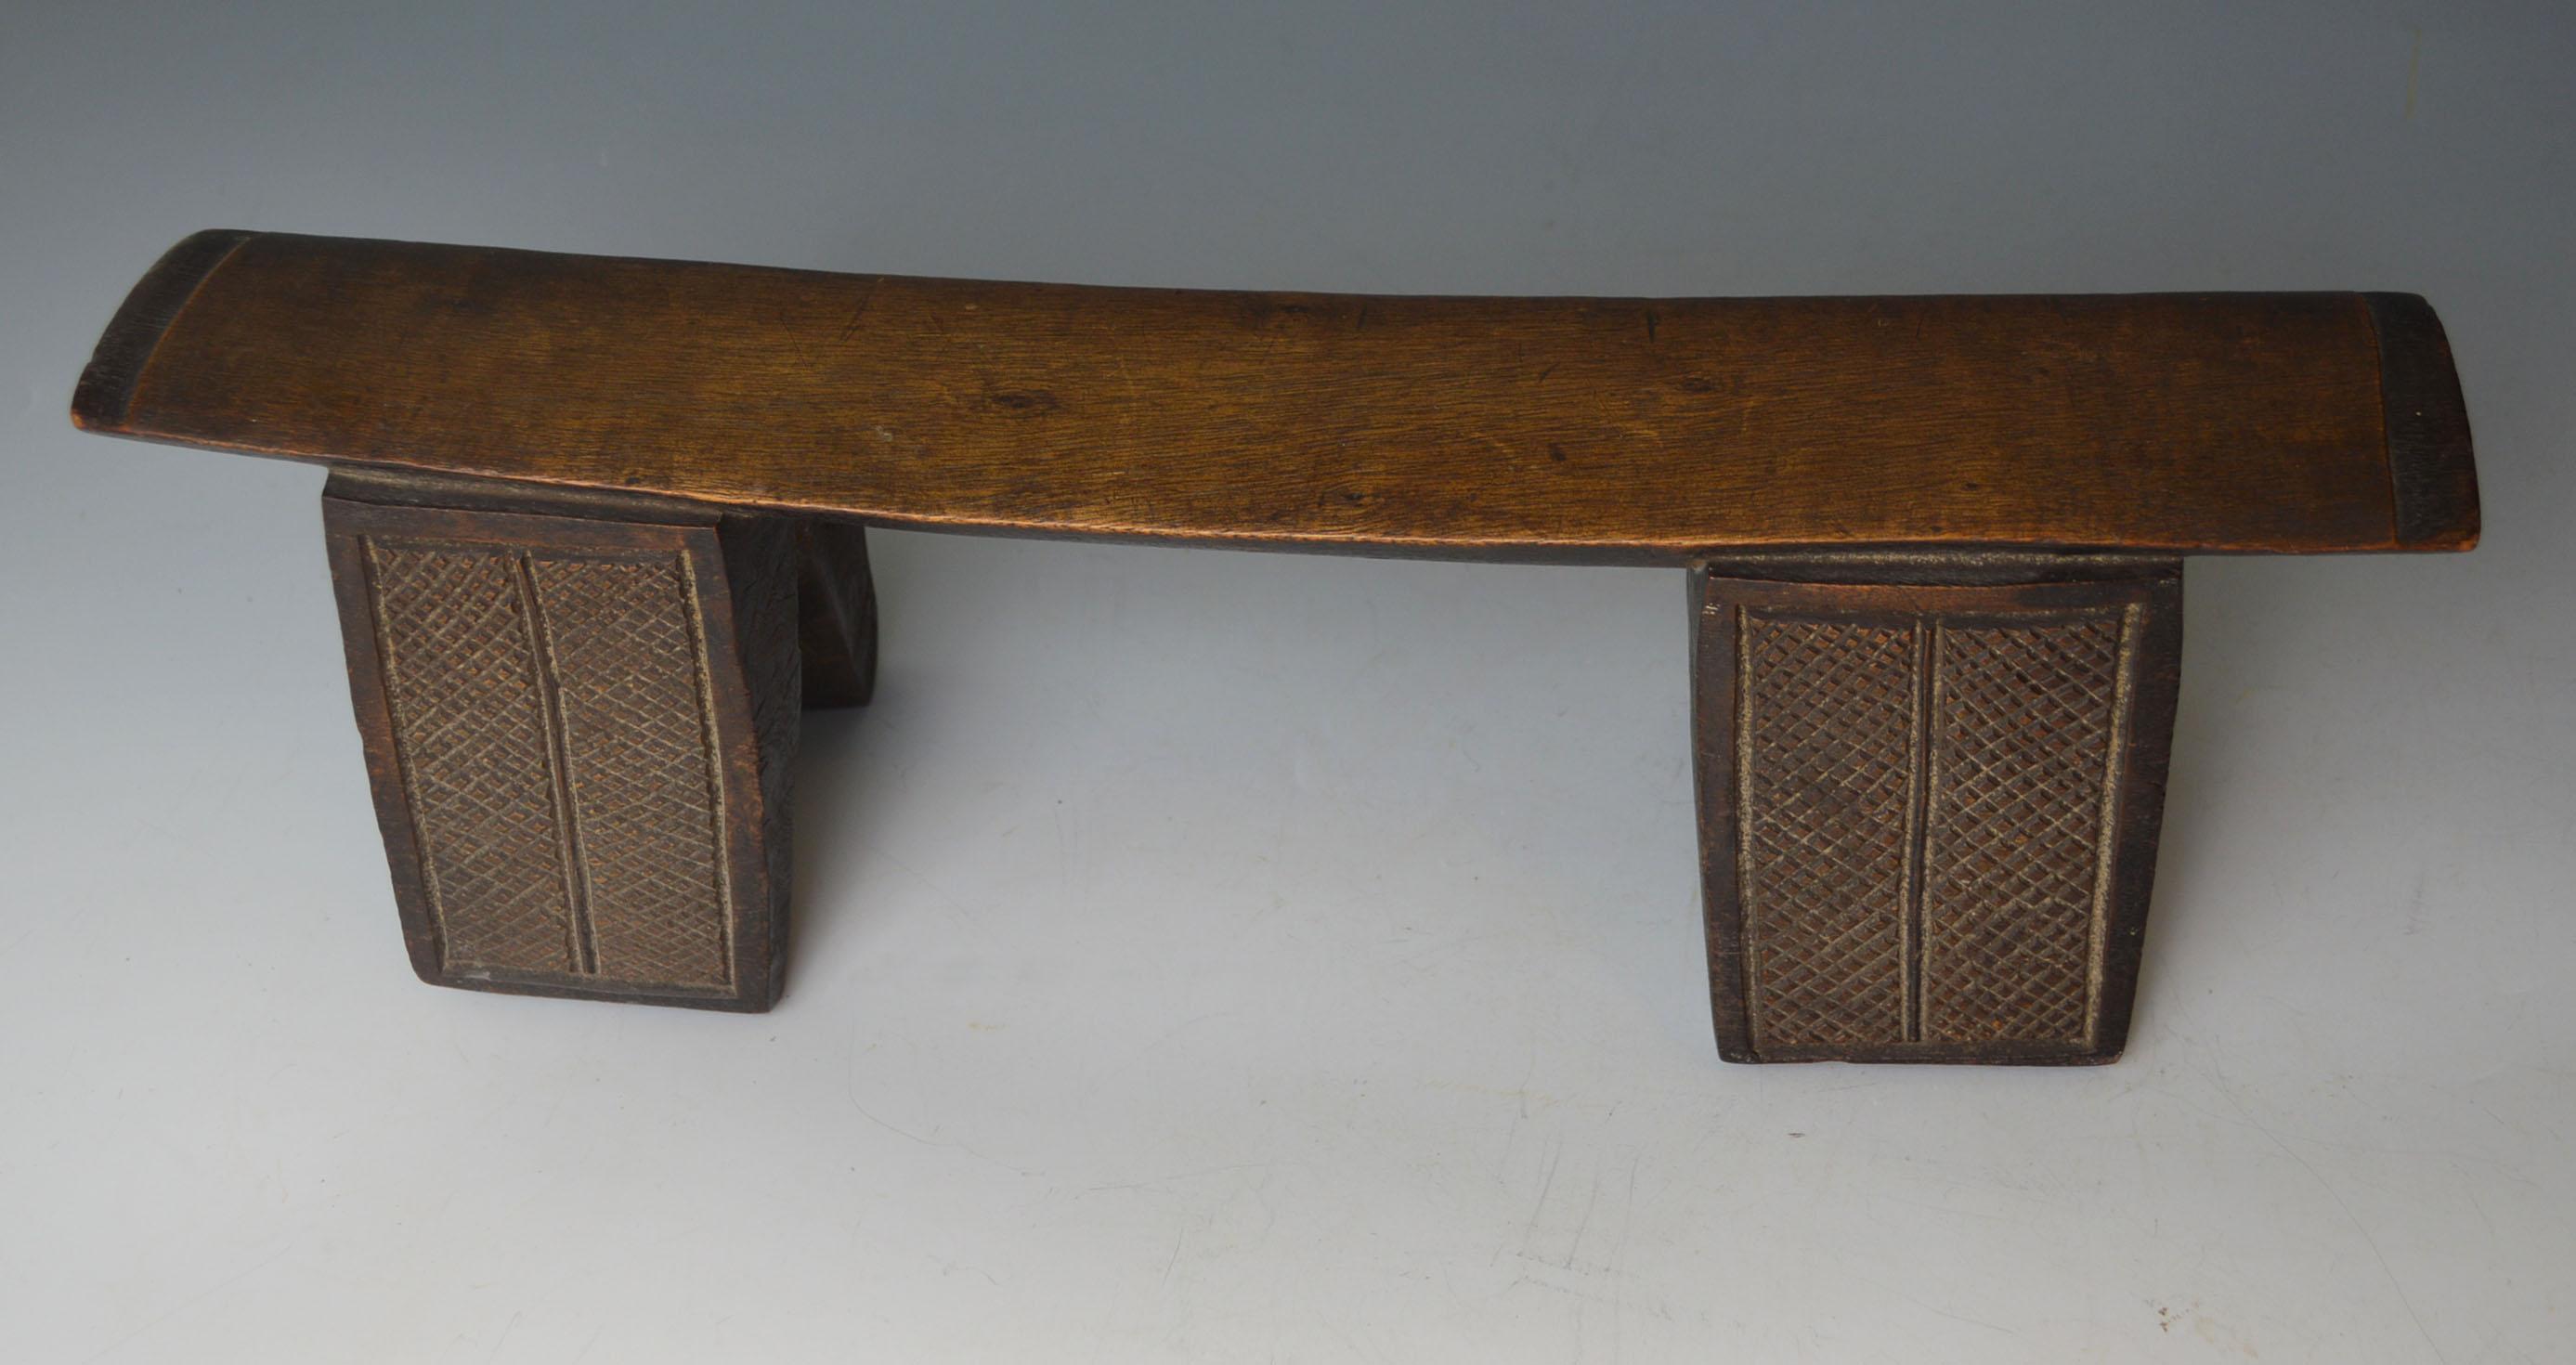 A fine Zulu head rest South Africa,
A fine large Zulu hard wood neck rest,
This Zulu neck rest is carved from a single piece of very hard wood with two fluted legs on each size and convex under section.
Collected by Charles Neilds of Manchester